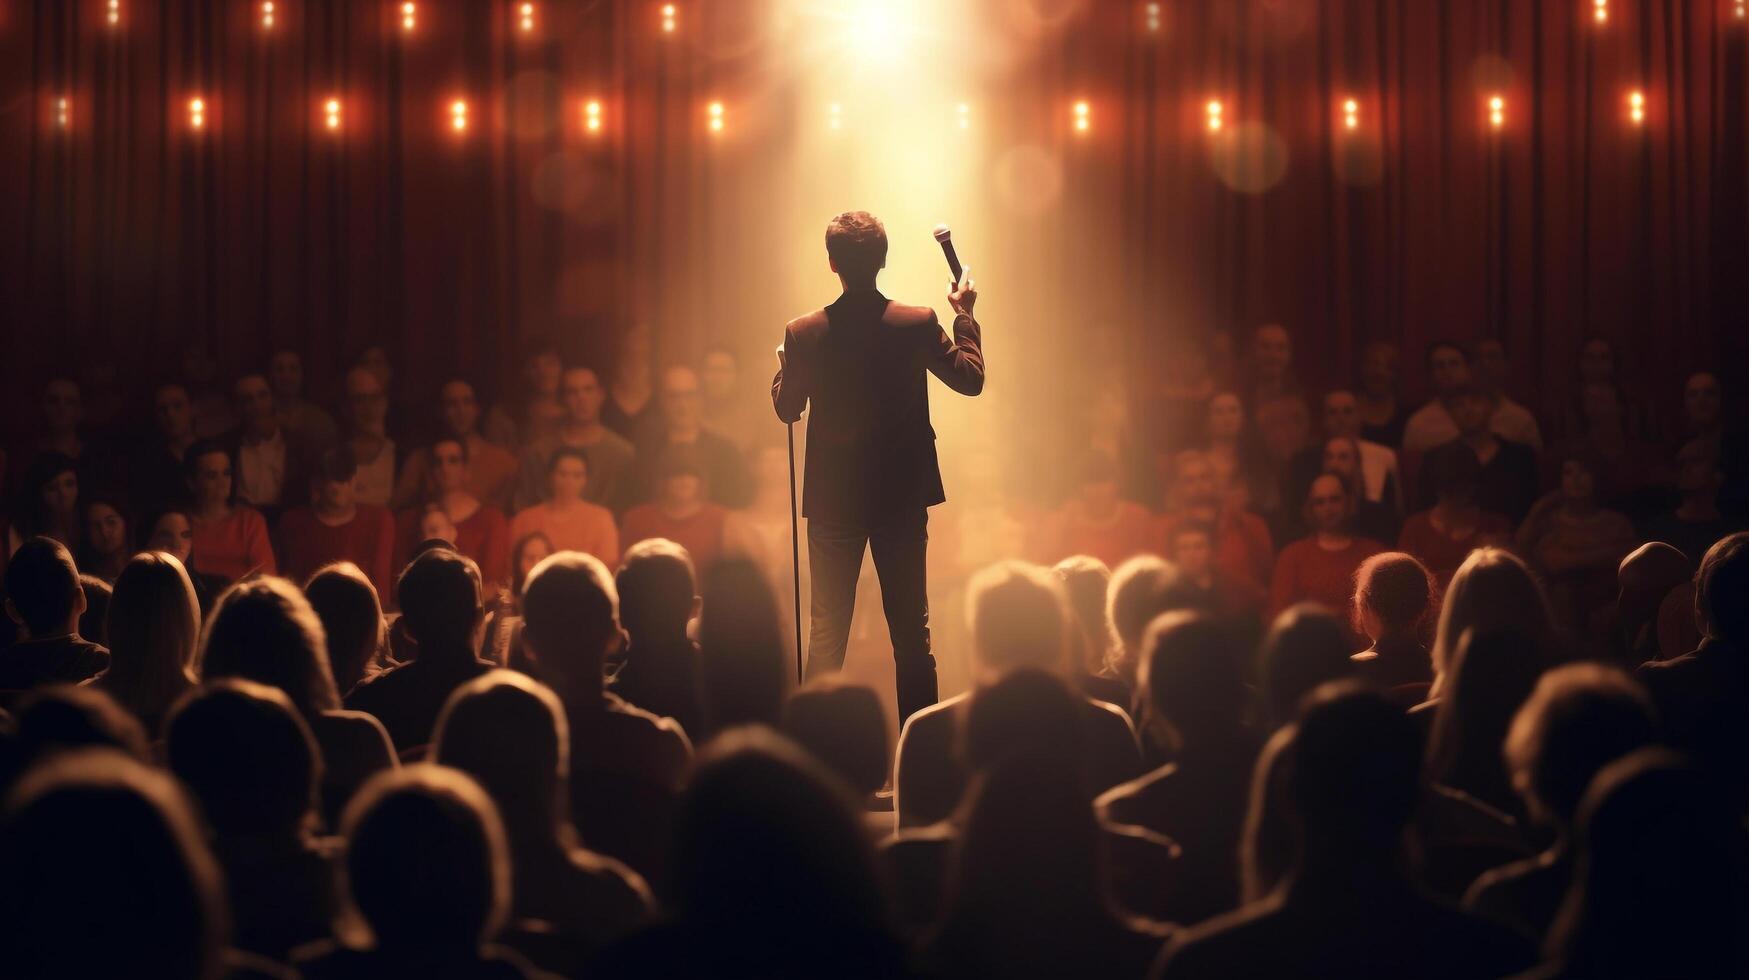 A speaker with microphone in front of audiences. Comedy music and theater live performance, photo